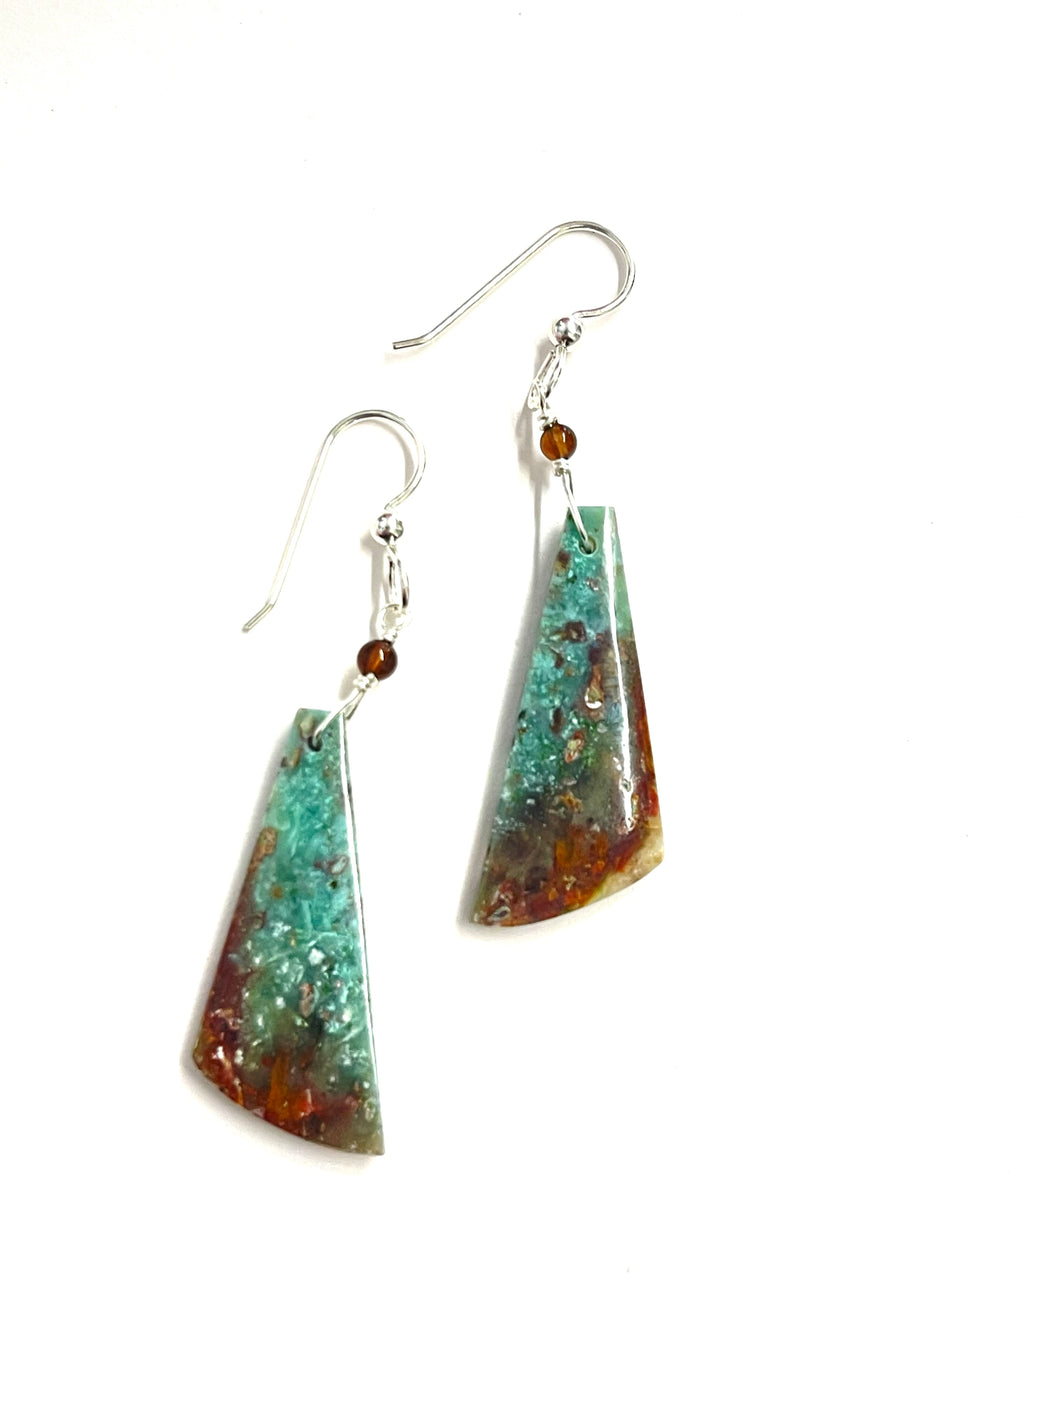 Earrings with black and green opalized wood